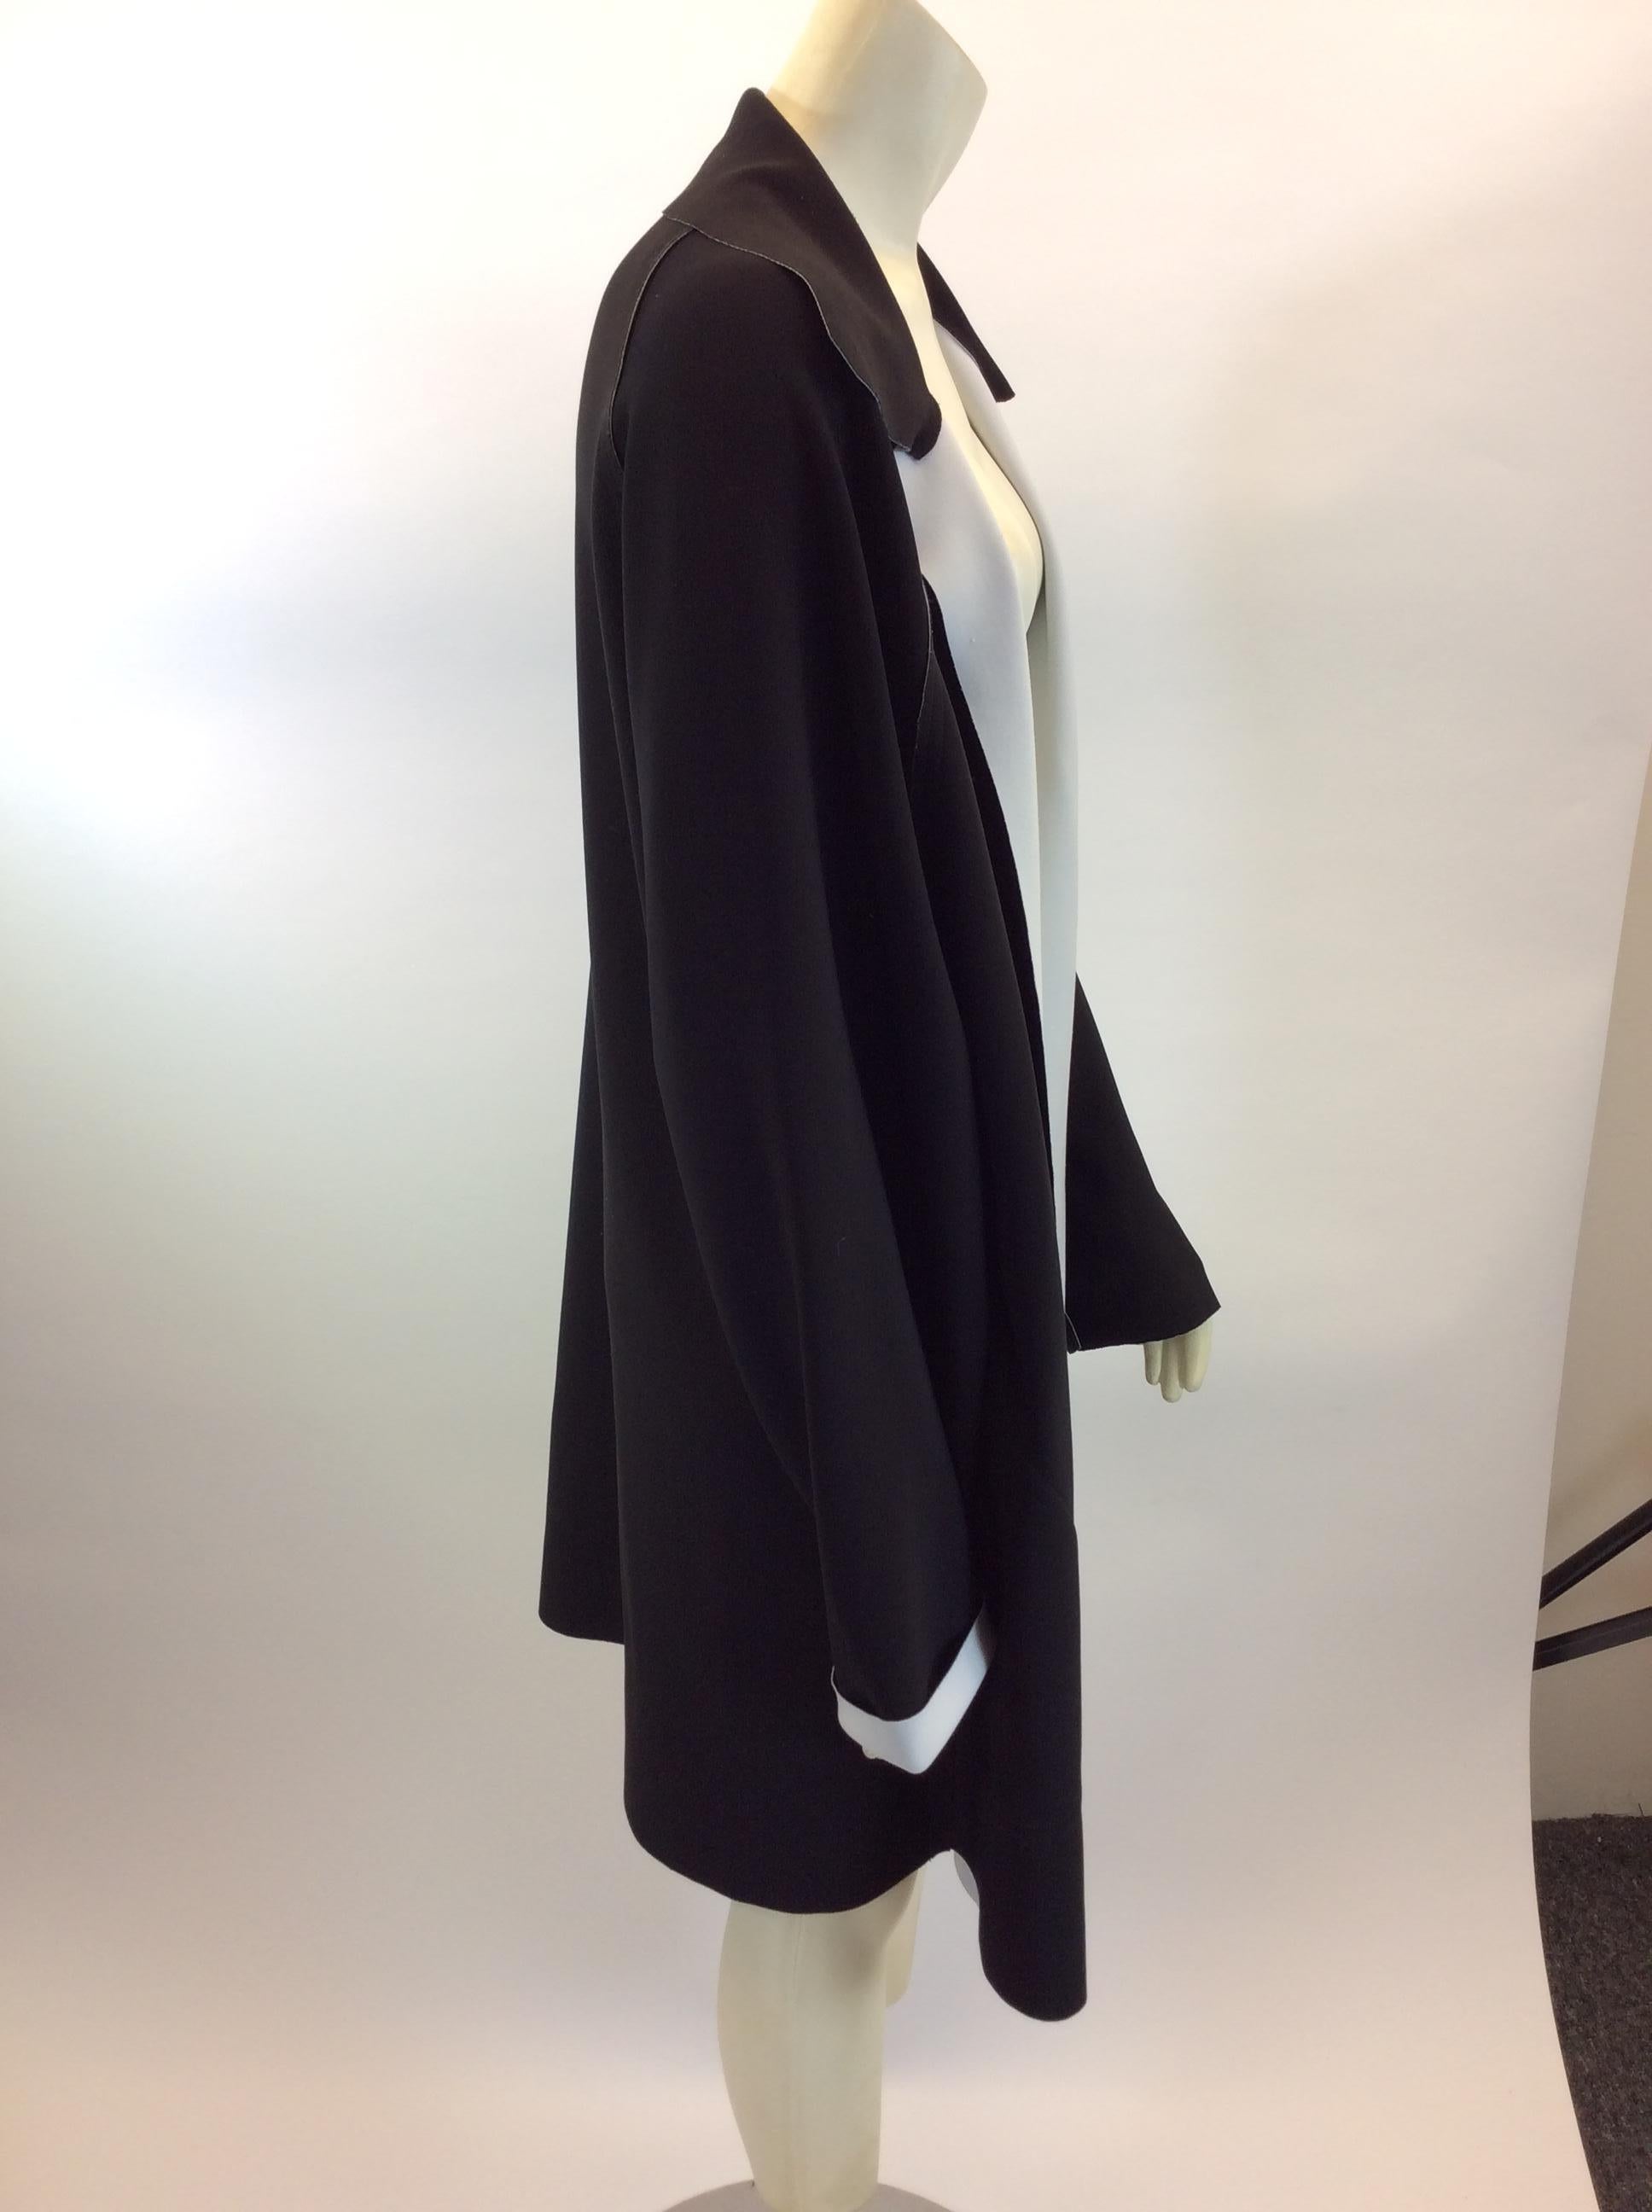 Women's Norma Kamali Black and White Jacket For Sale